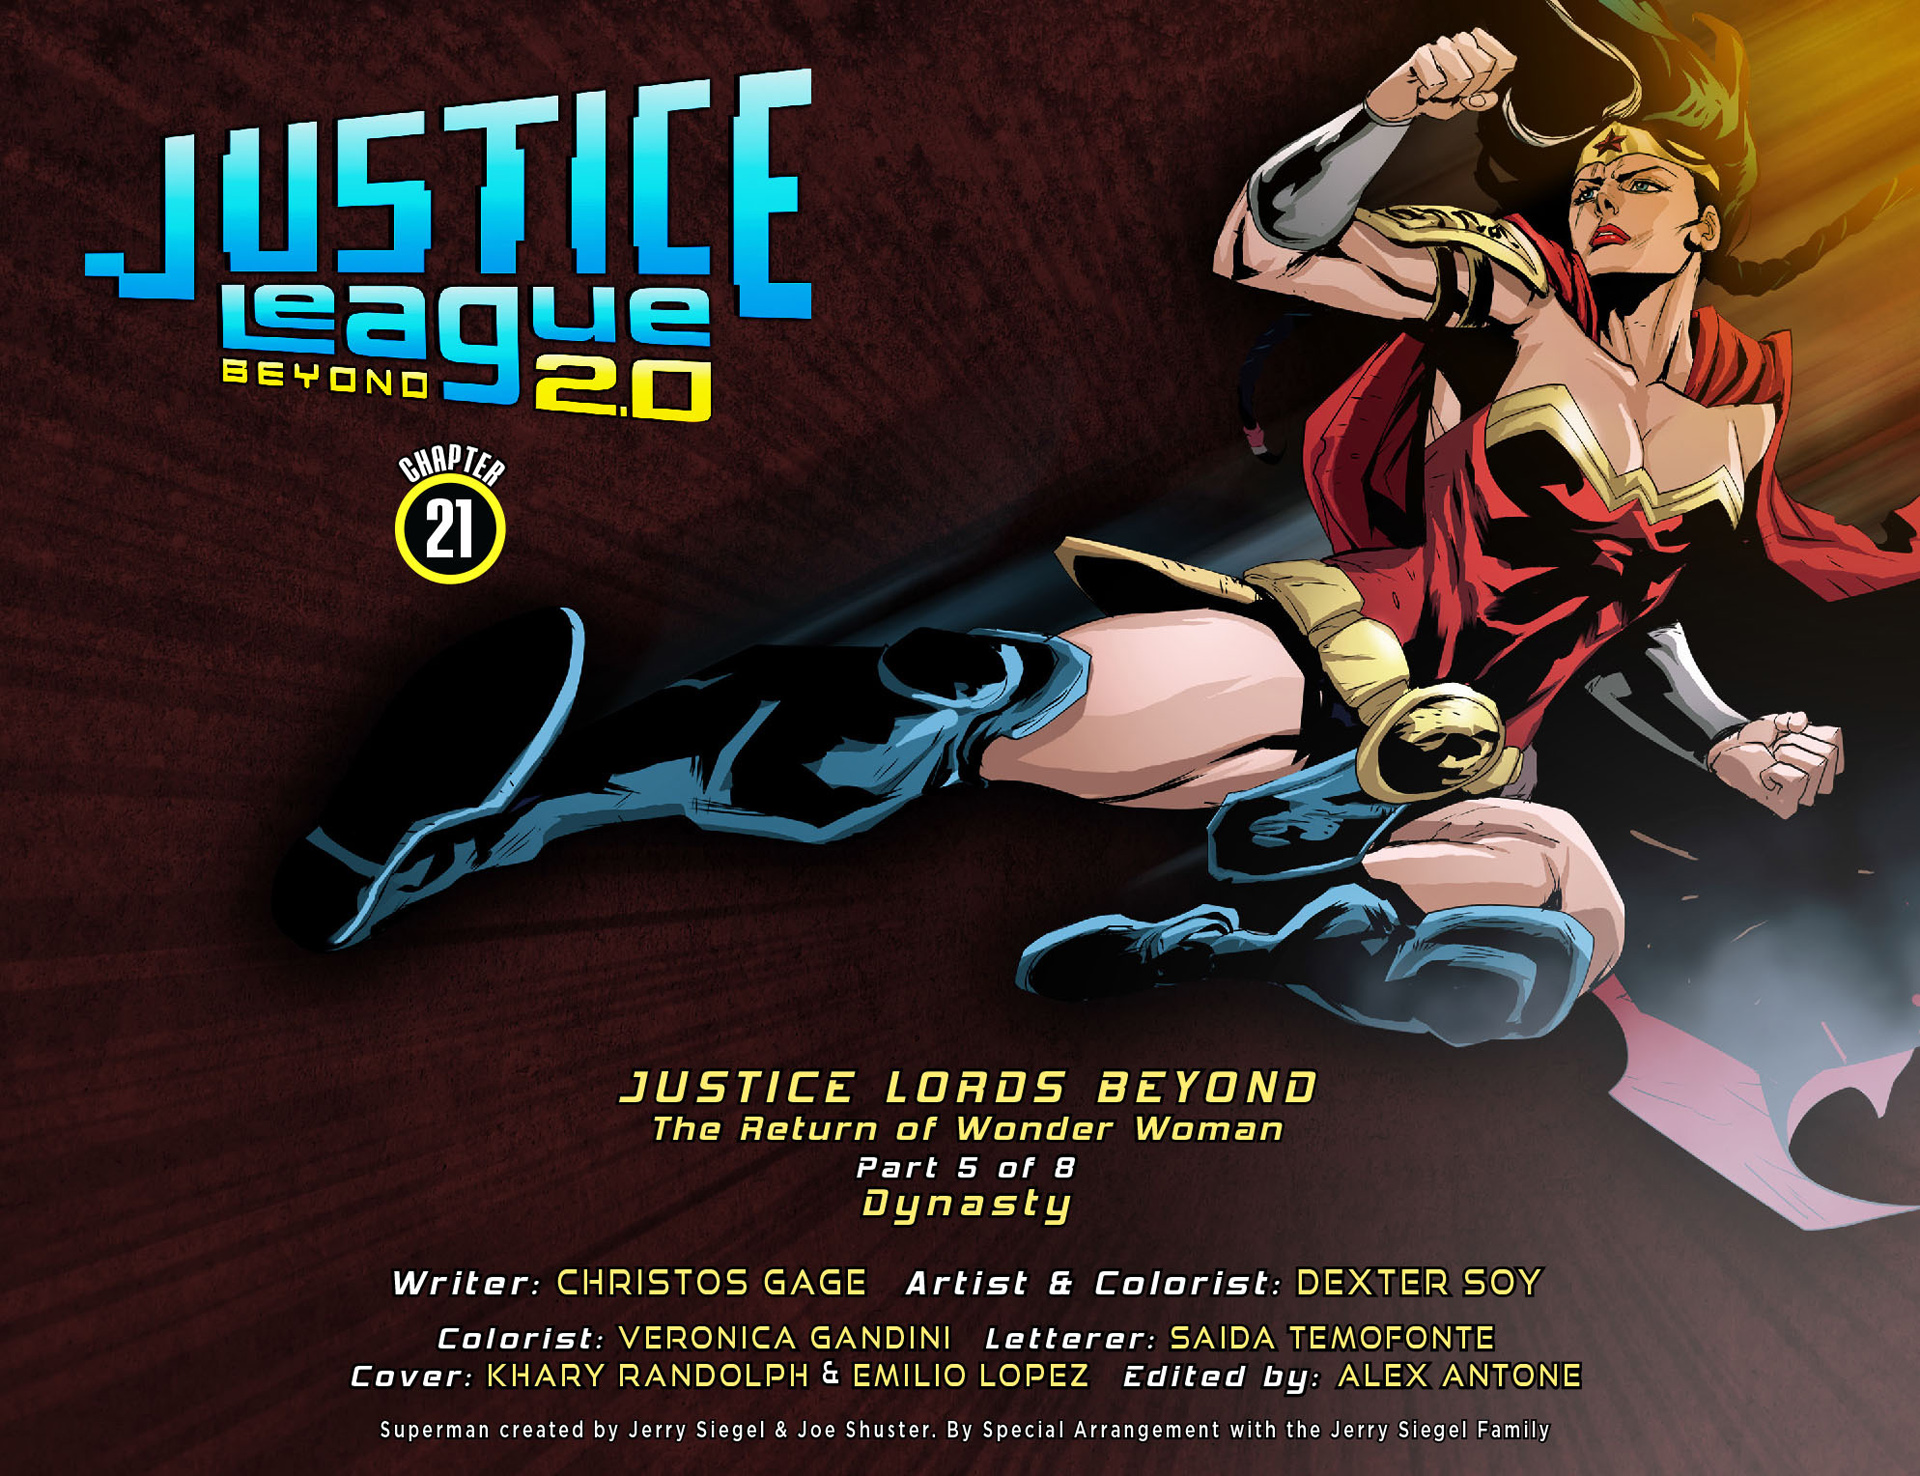 Read online Justice League Beyond 2.0 comic -  Issue #21 - 2